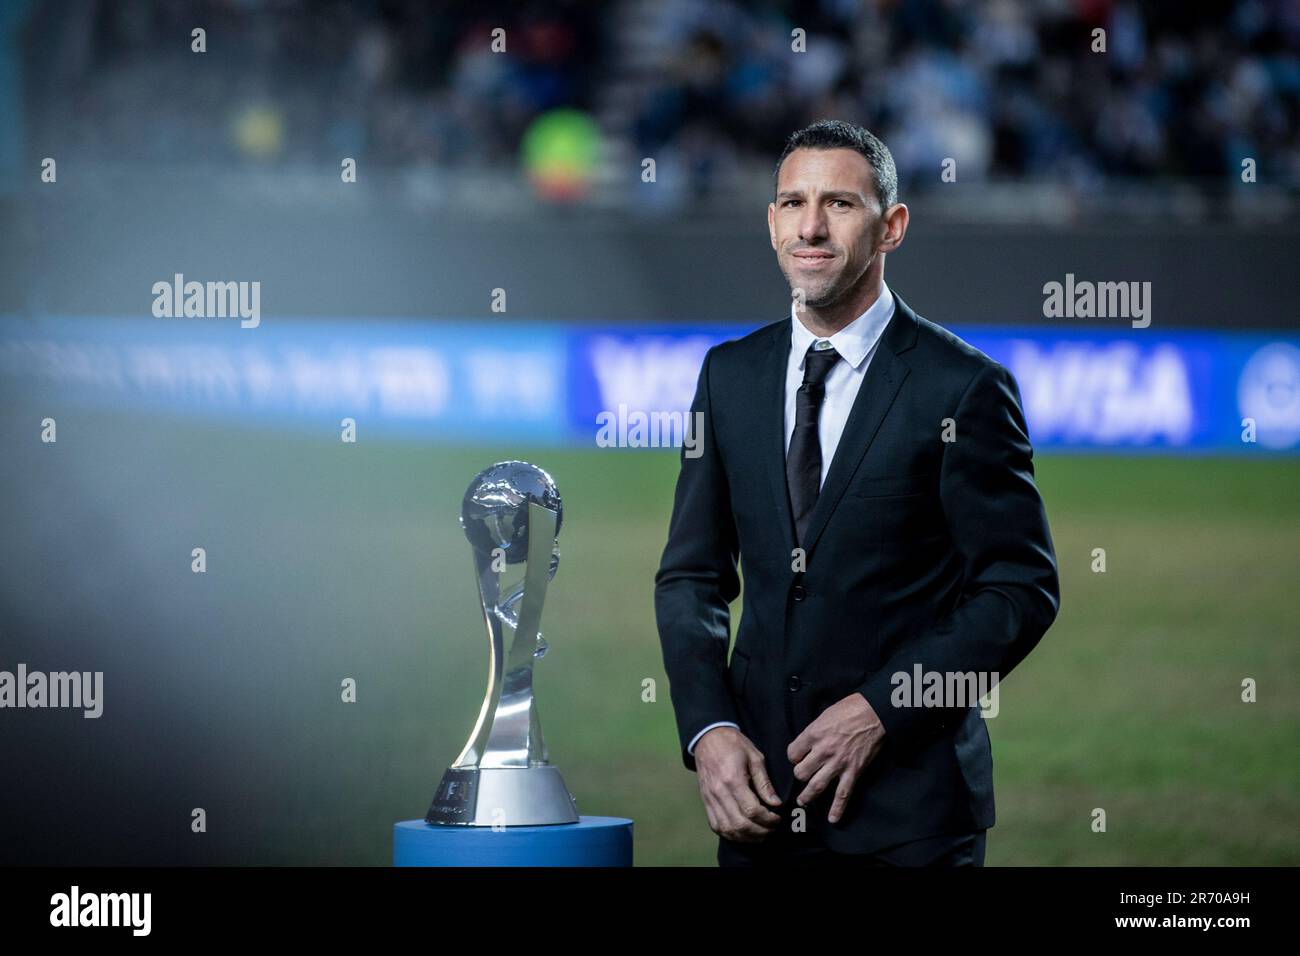 Maximiliano Rodríguez, former player and FIFA U20 World Cup 2001 Champion looks on prior the FIFA U-20 World Cup Argentina 2023 Final match between Italy and Uruguay at Estadio La Plata. Stock Photo